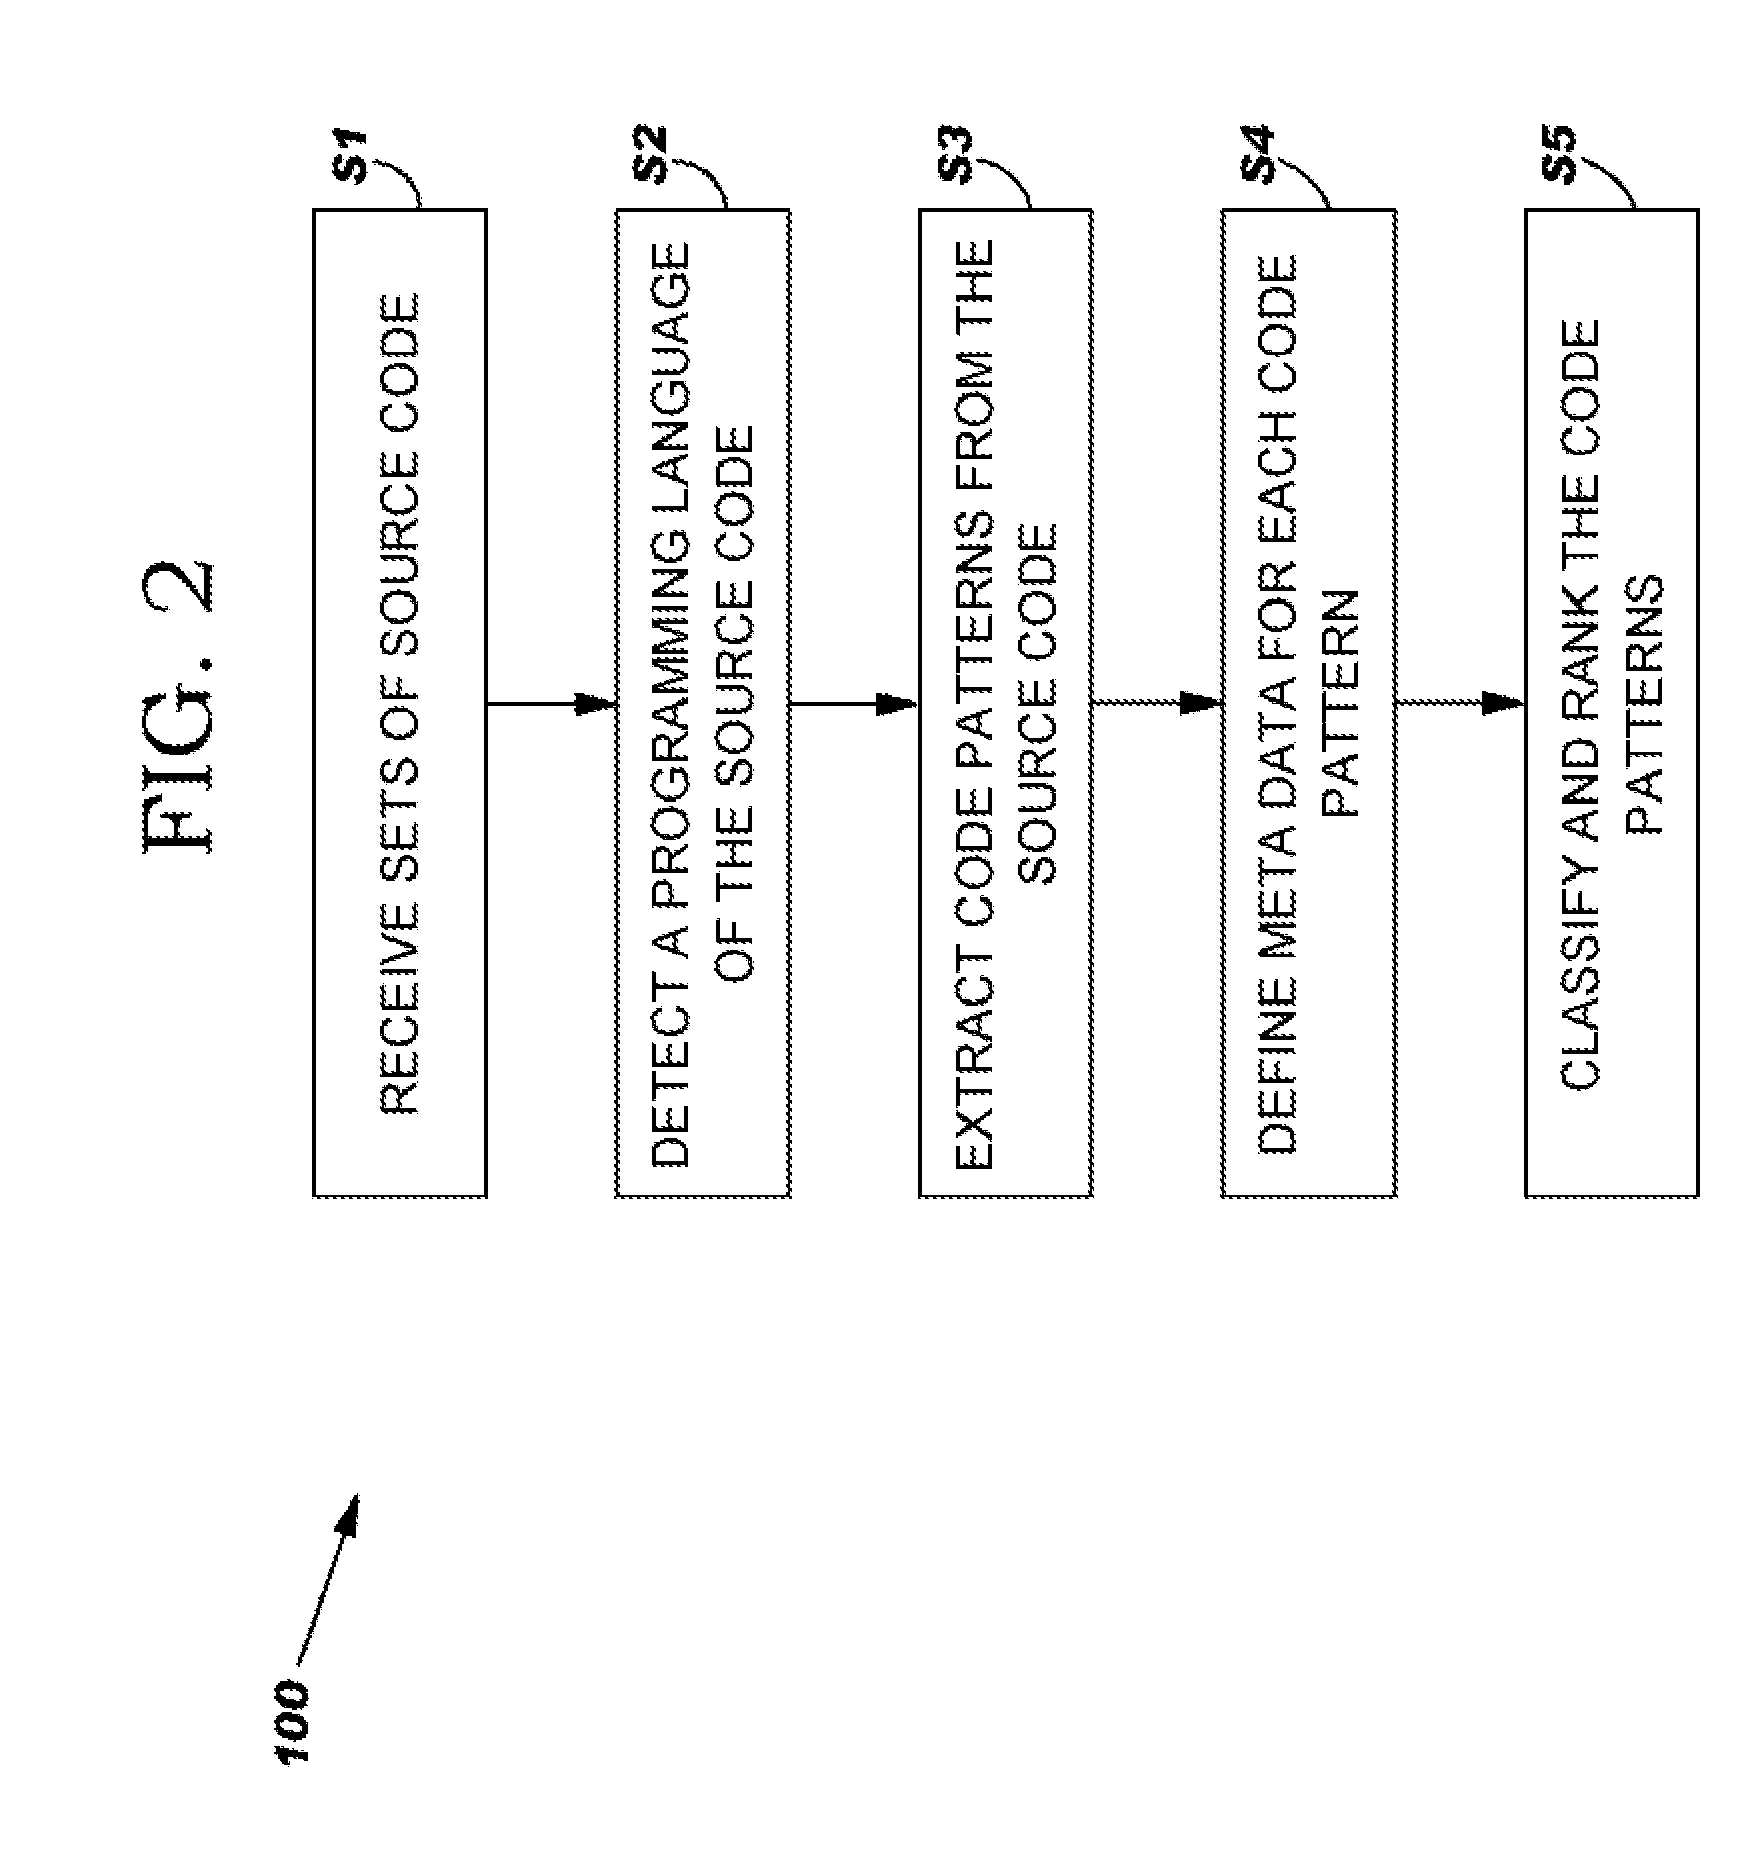 Method, system and program product for detecting deviation from software development best practice resource in a code sharing system